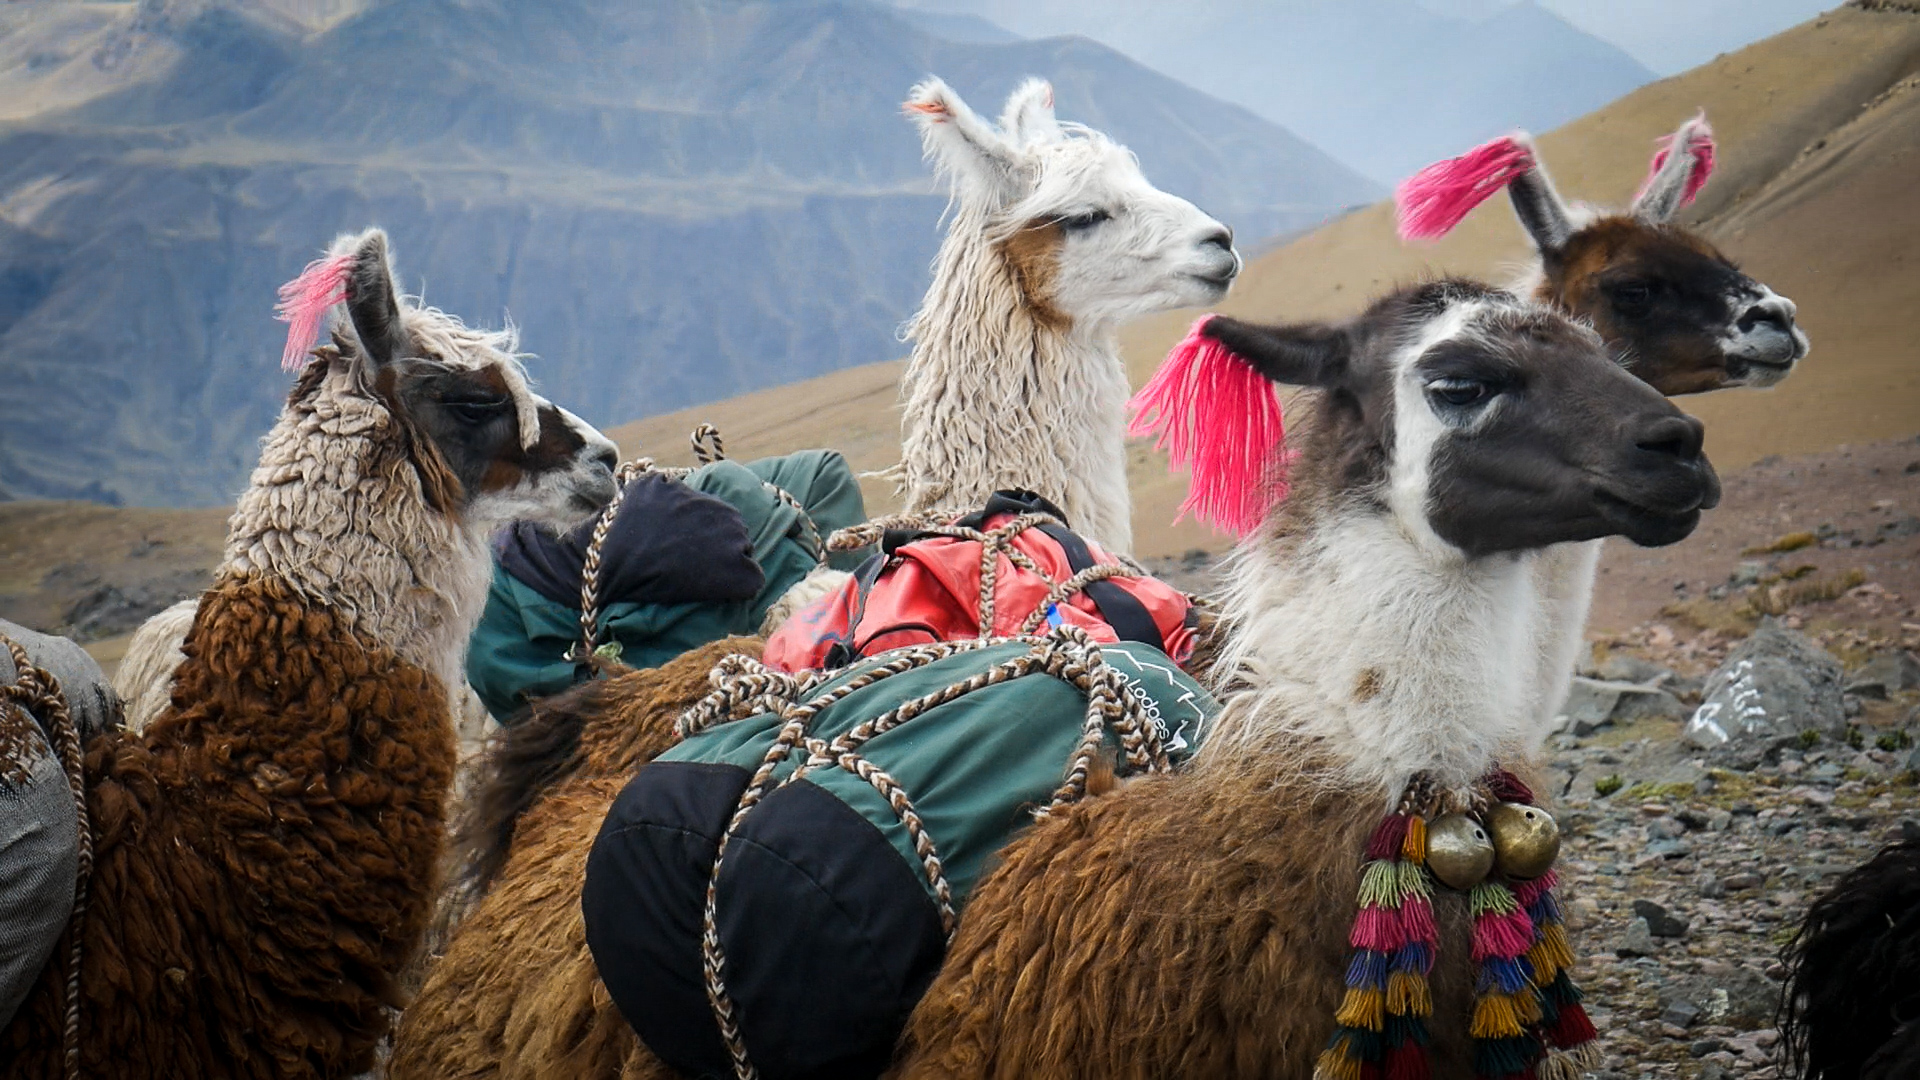 Just looking at the picture, a loving feeling comes in me, imagine them at live? They said the colored ear is to signal that they are male. These llamas were helping a group of hikers to carry their things. I could spend hours observing every detail and movement of these animals.